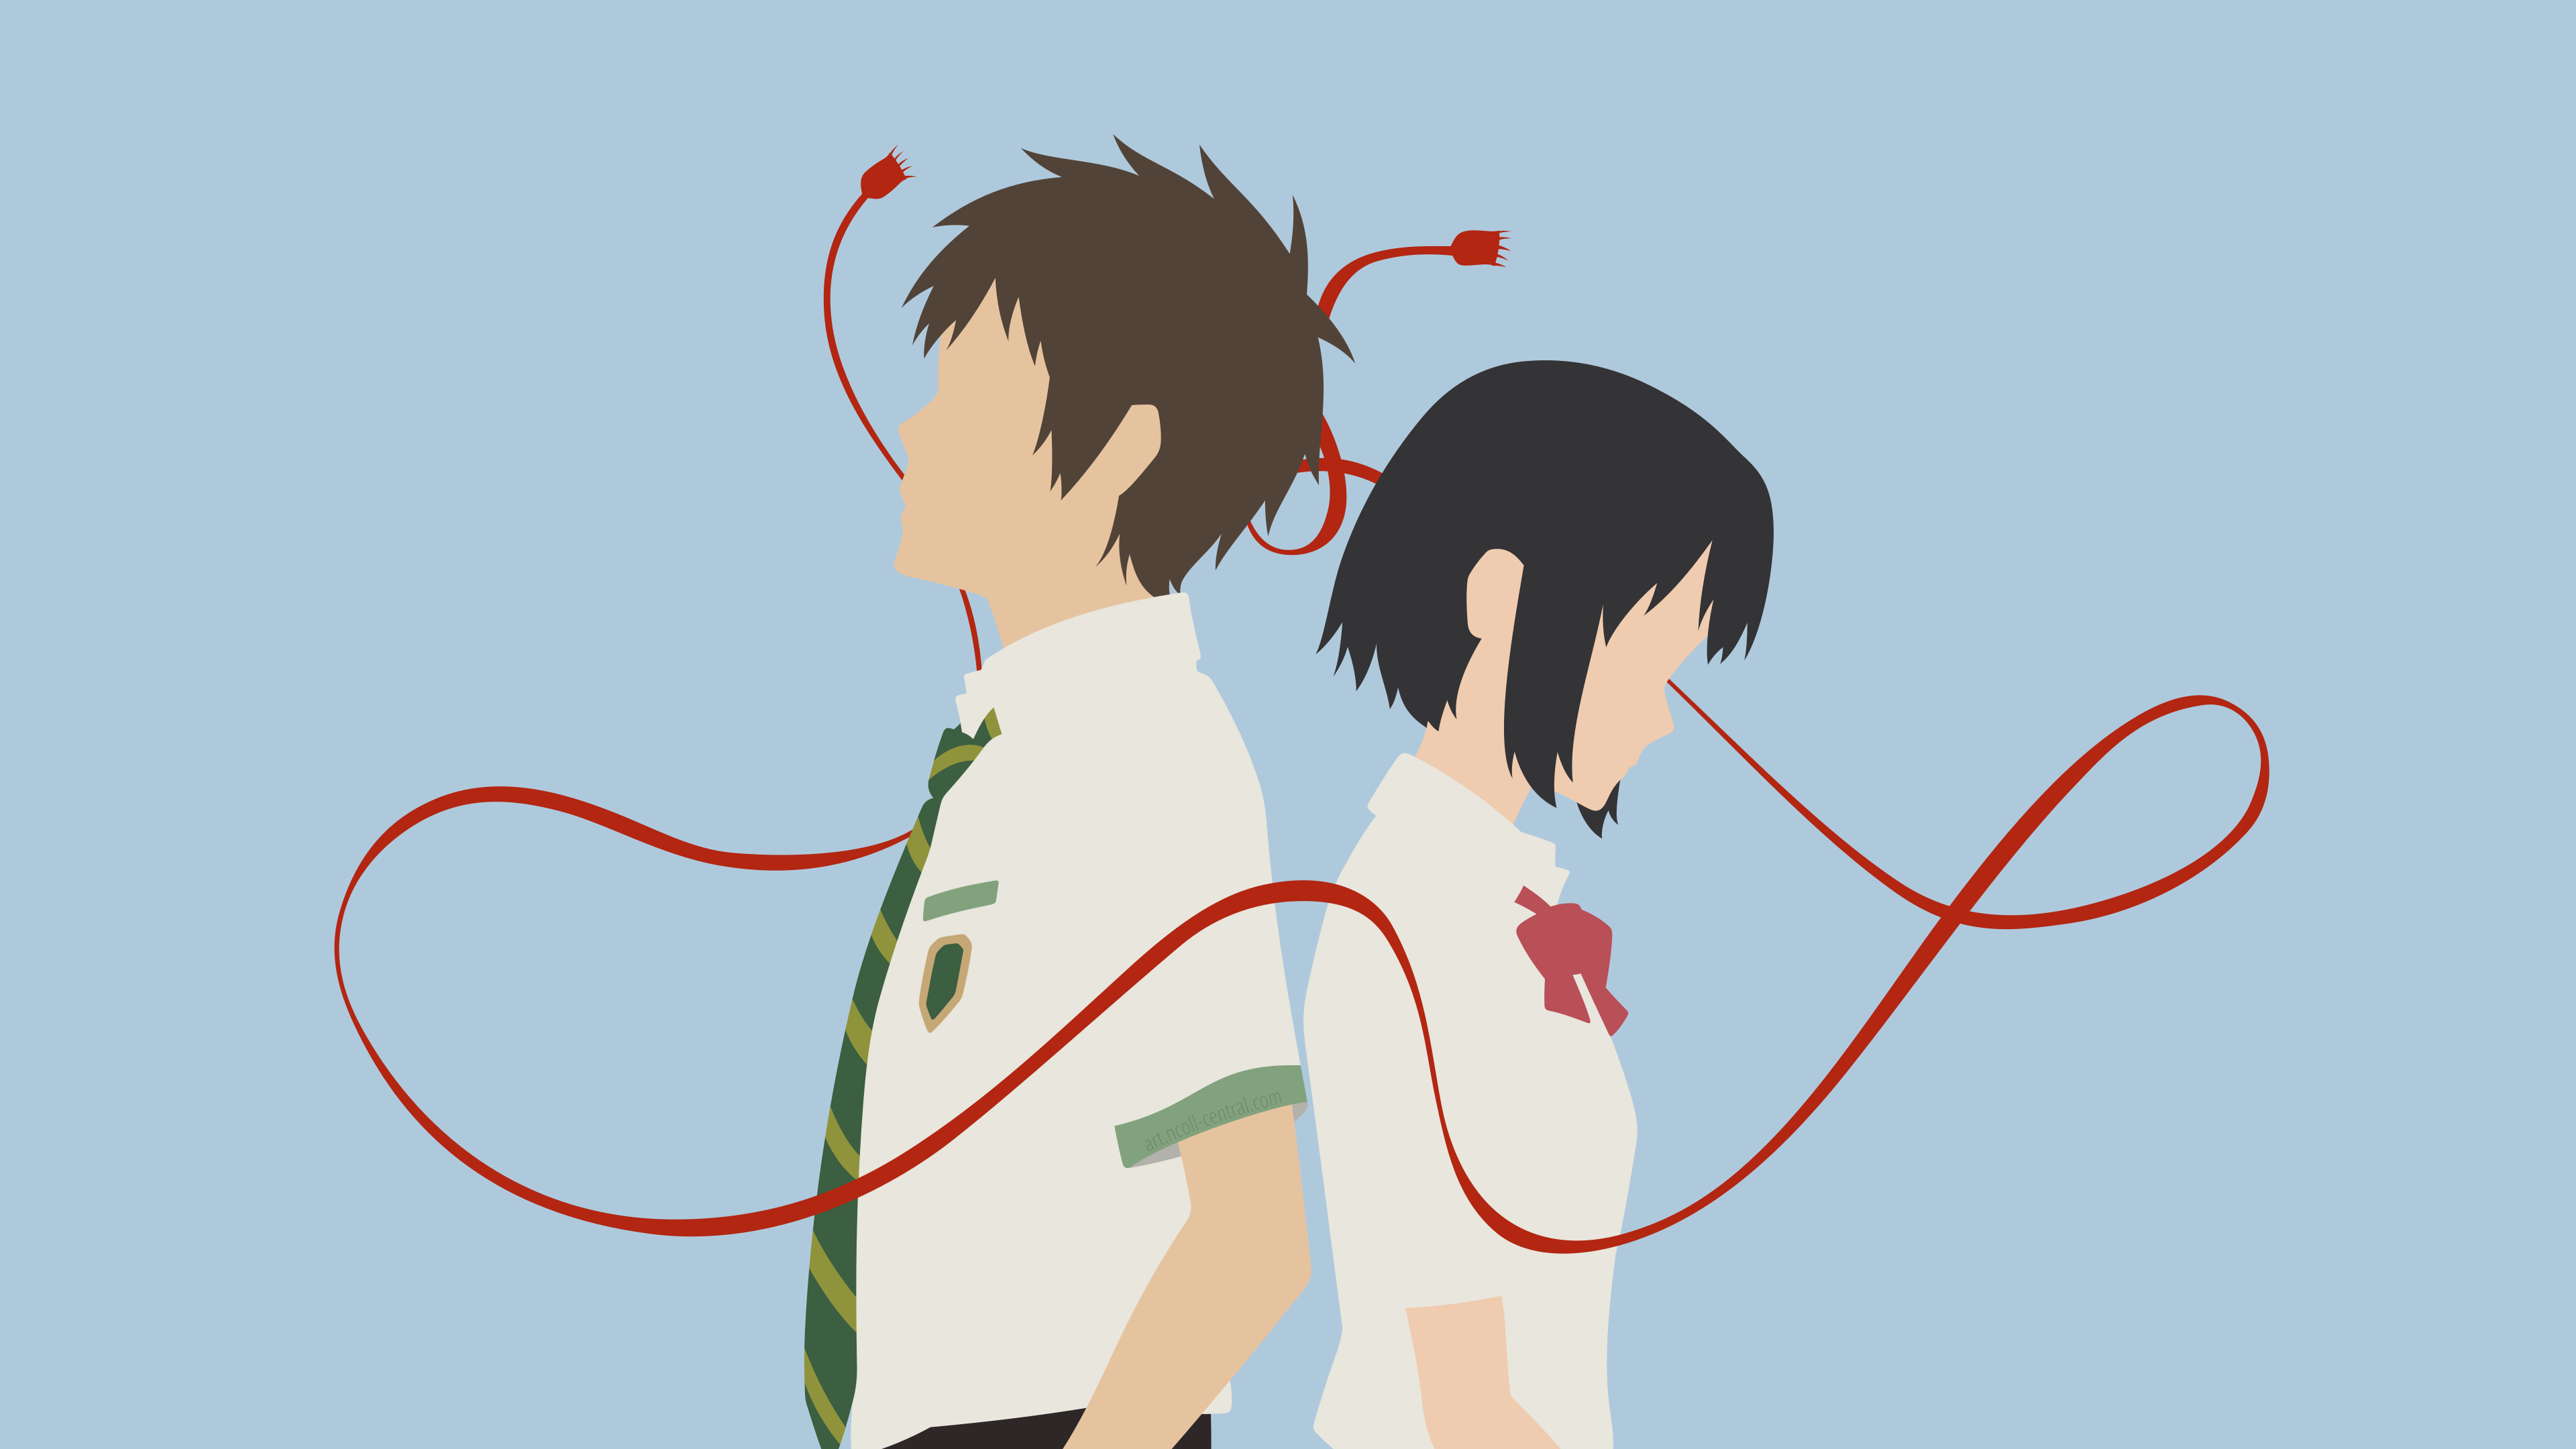 Your Name, a Hand-painted Illustration of the Popular Manga and Anime Film,  Characters Mitsuha and Taki - Etsy